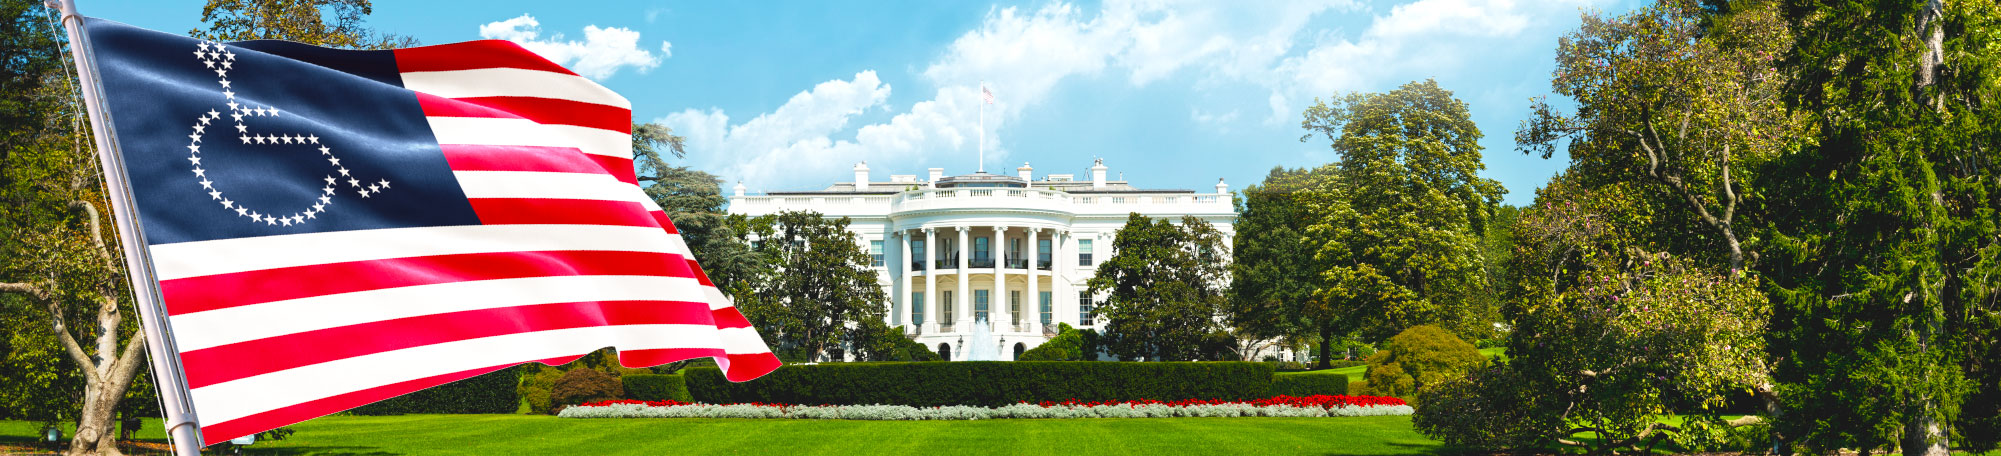 A photo of the white house with the international ADA flag waving in the foreground.